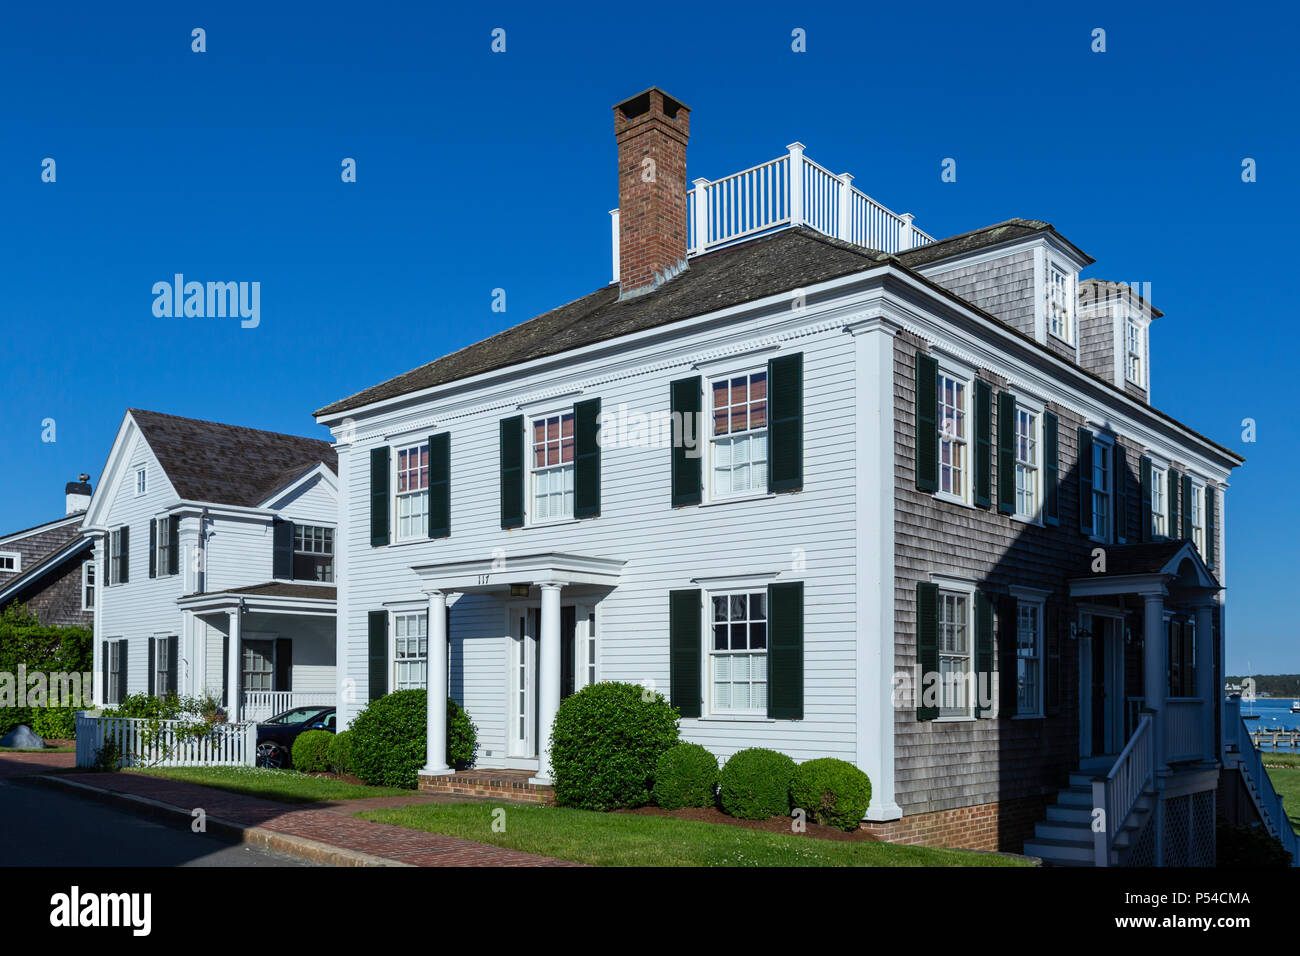 A white clapboard-fronted house, in the style of a sea captain's home, along N Water Street in Edgartown, Massachusetts on Martha's Vineyard. Stock Photo